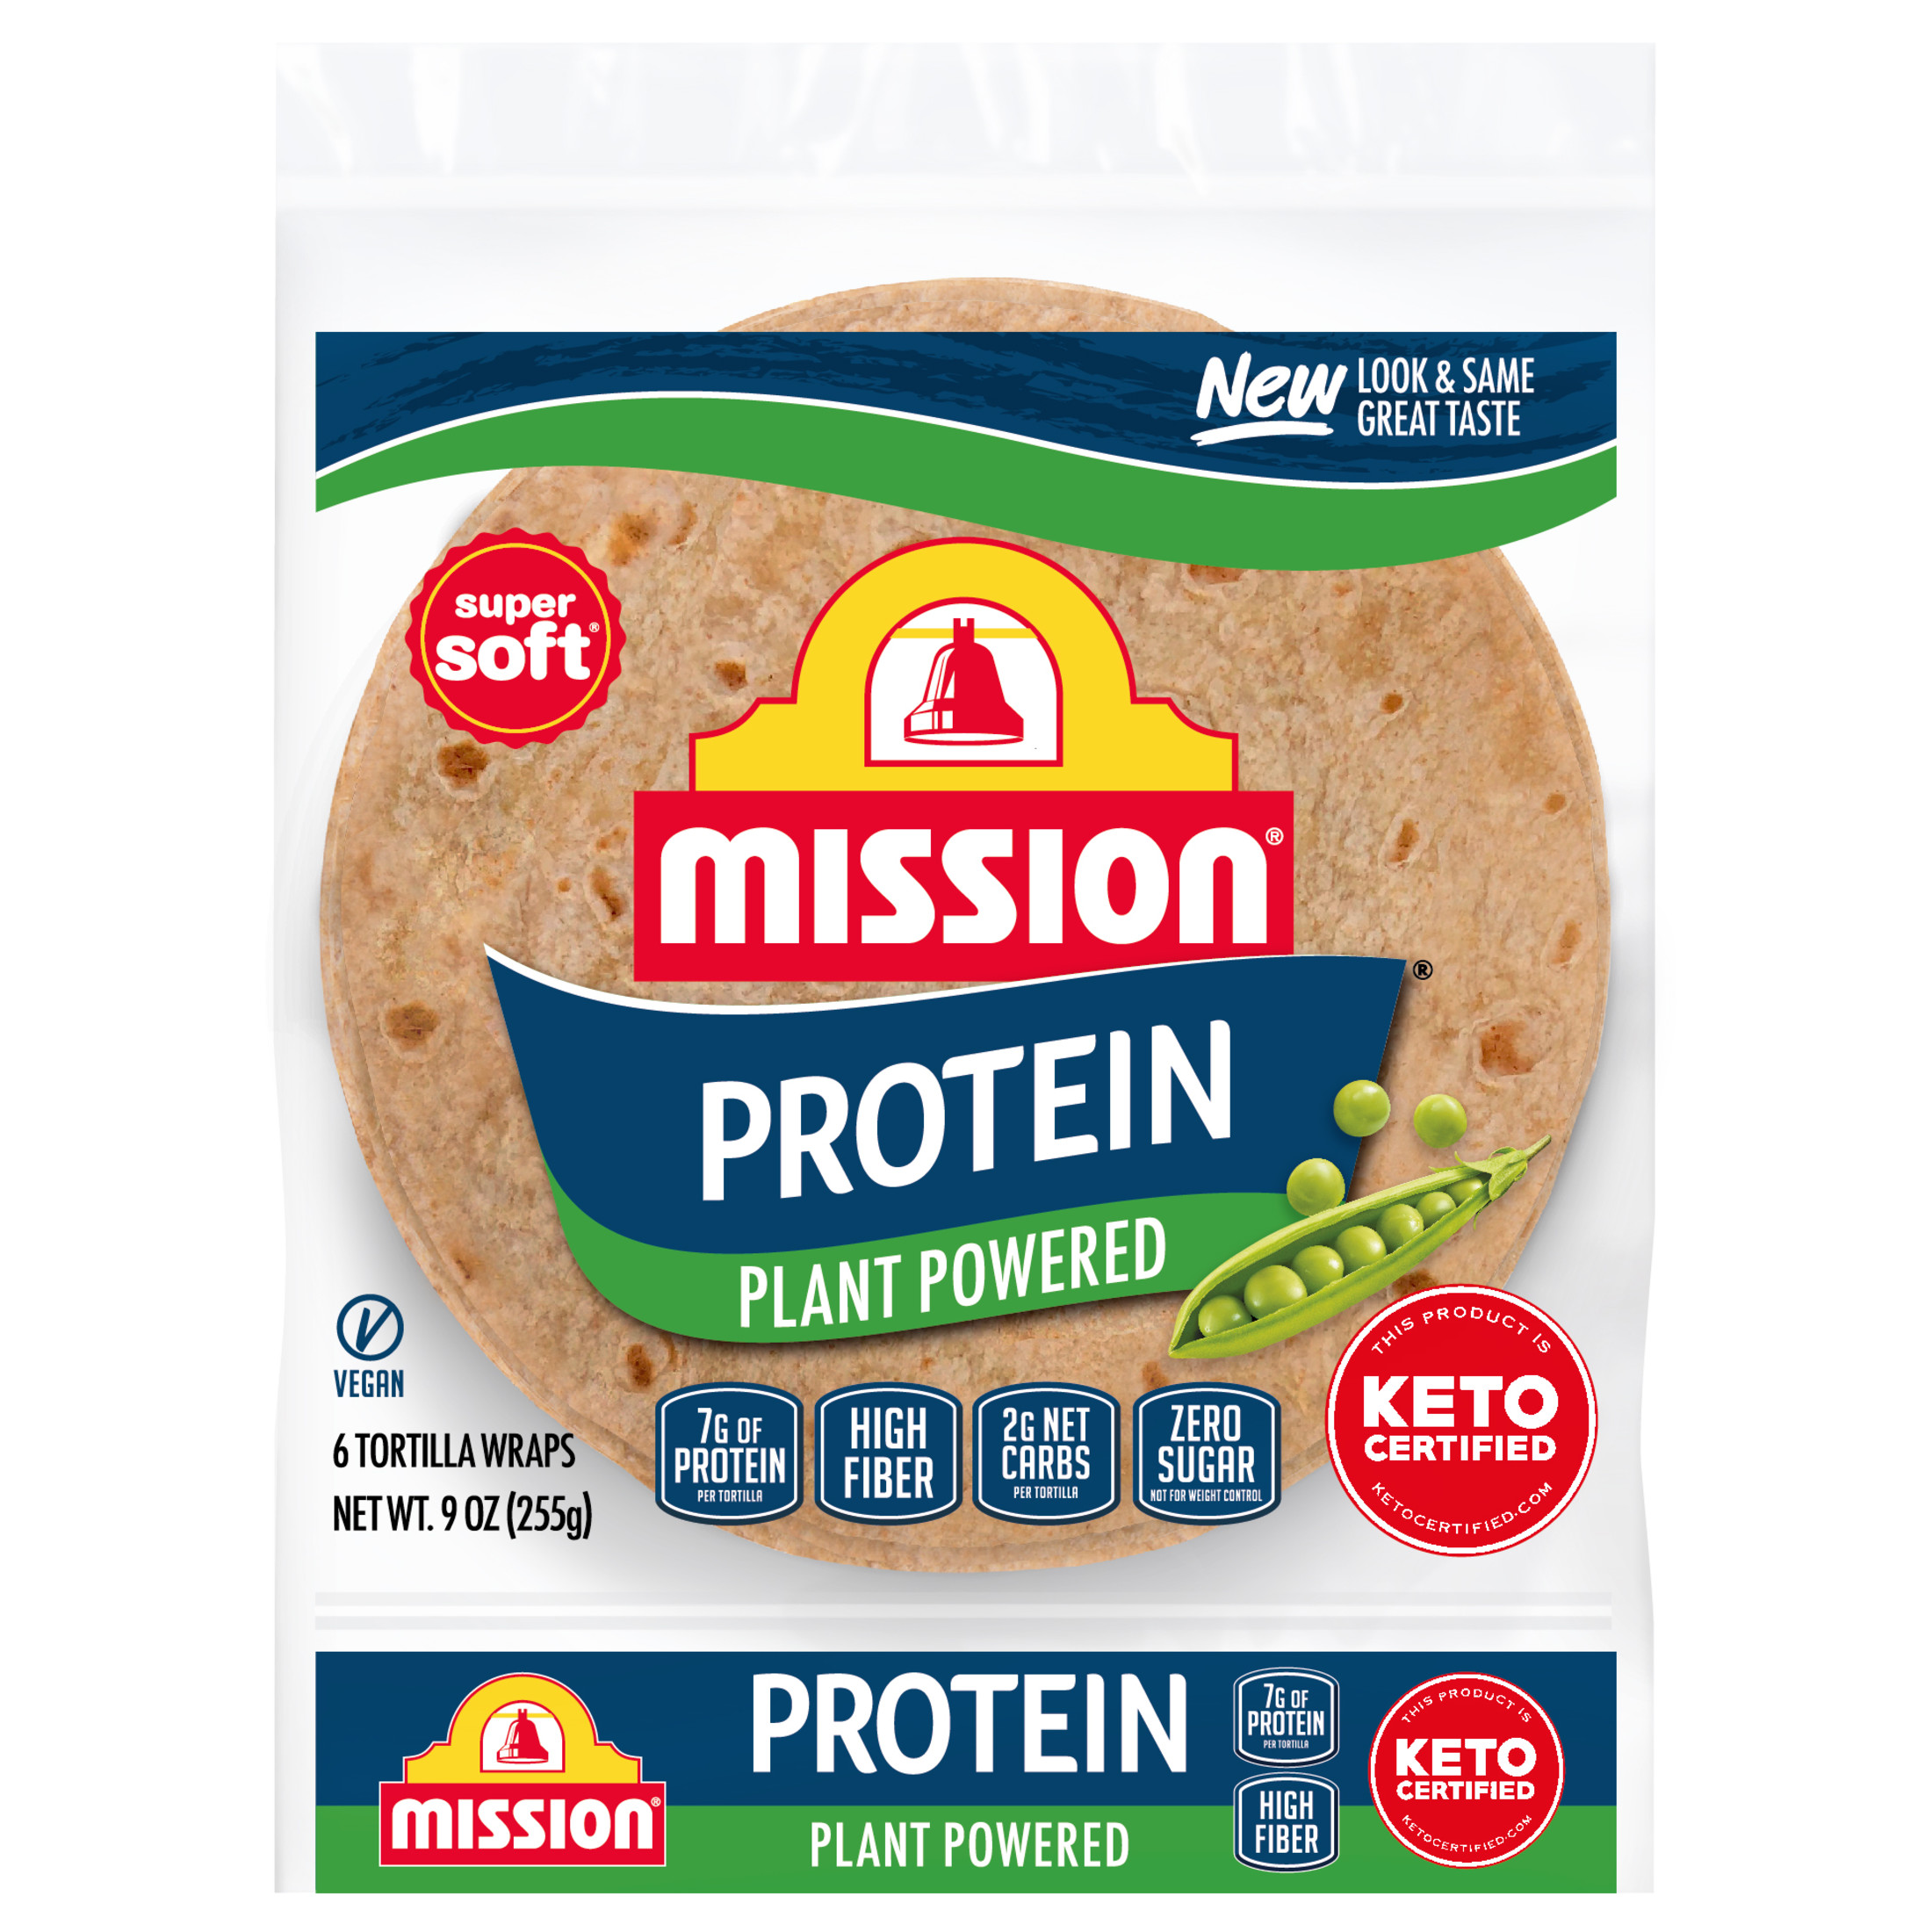 Mission Super Soft Protein Plant Powered Tortilla Wraps, 9 oz, 6 Count - image 1 of 11